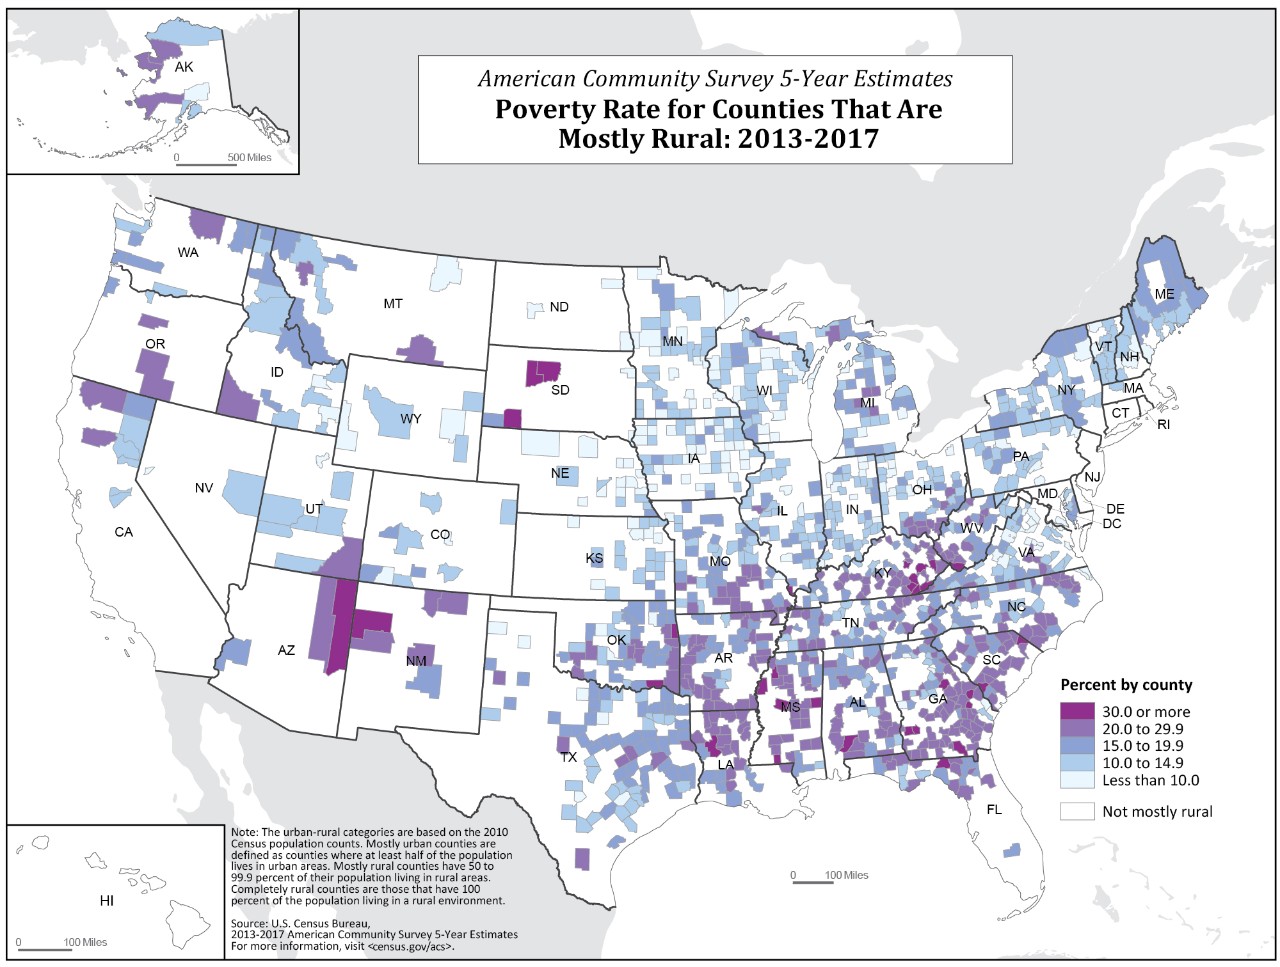 Poverty Rate for Counties That Are Mostly Rural: 2013-2017